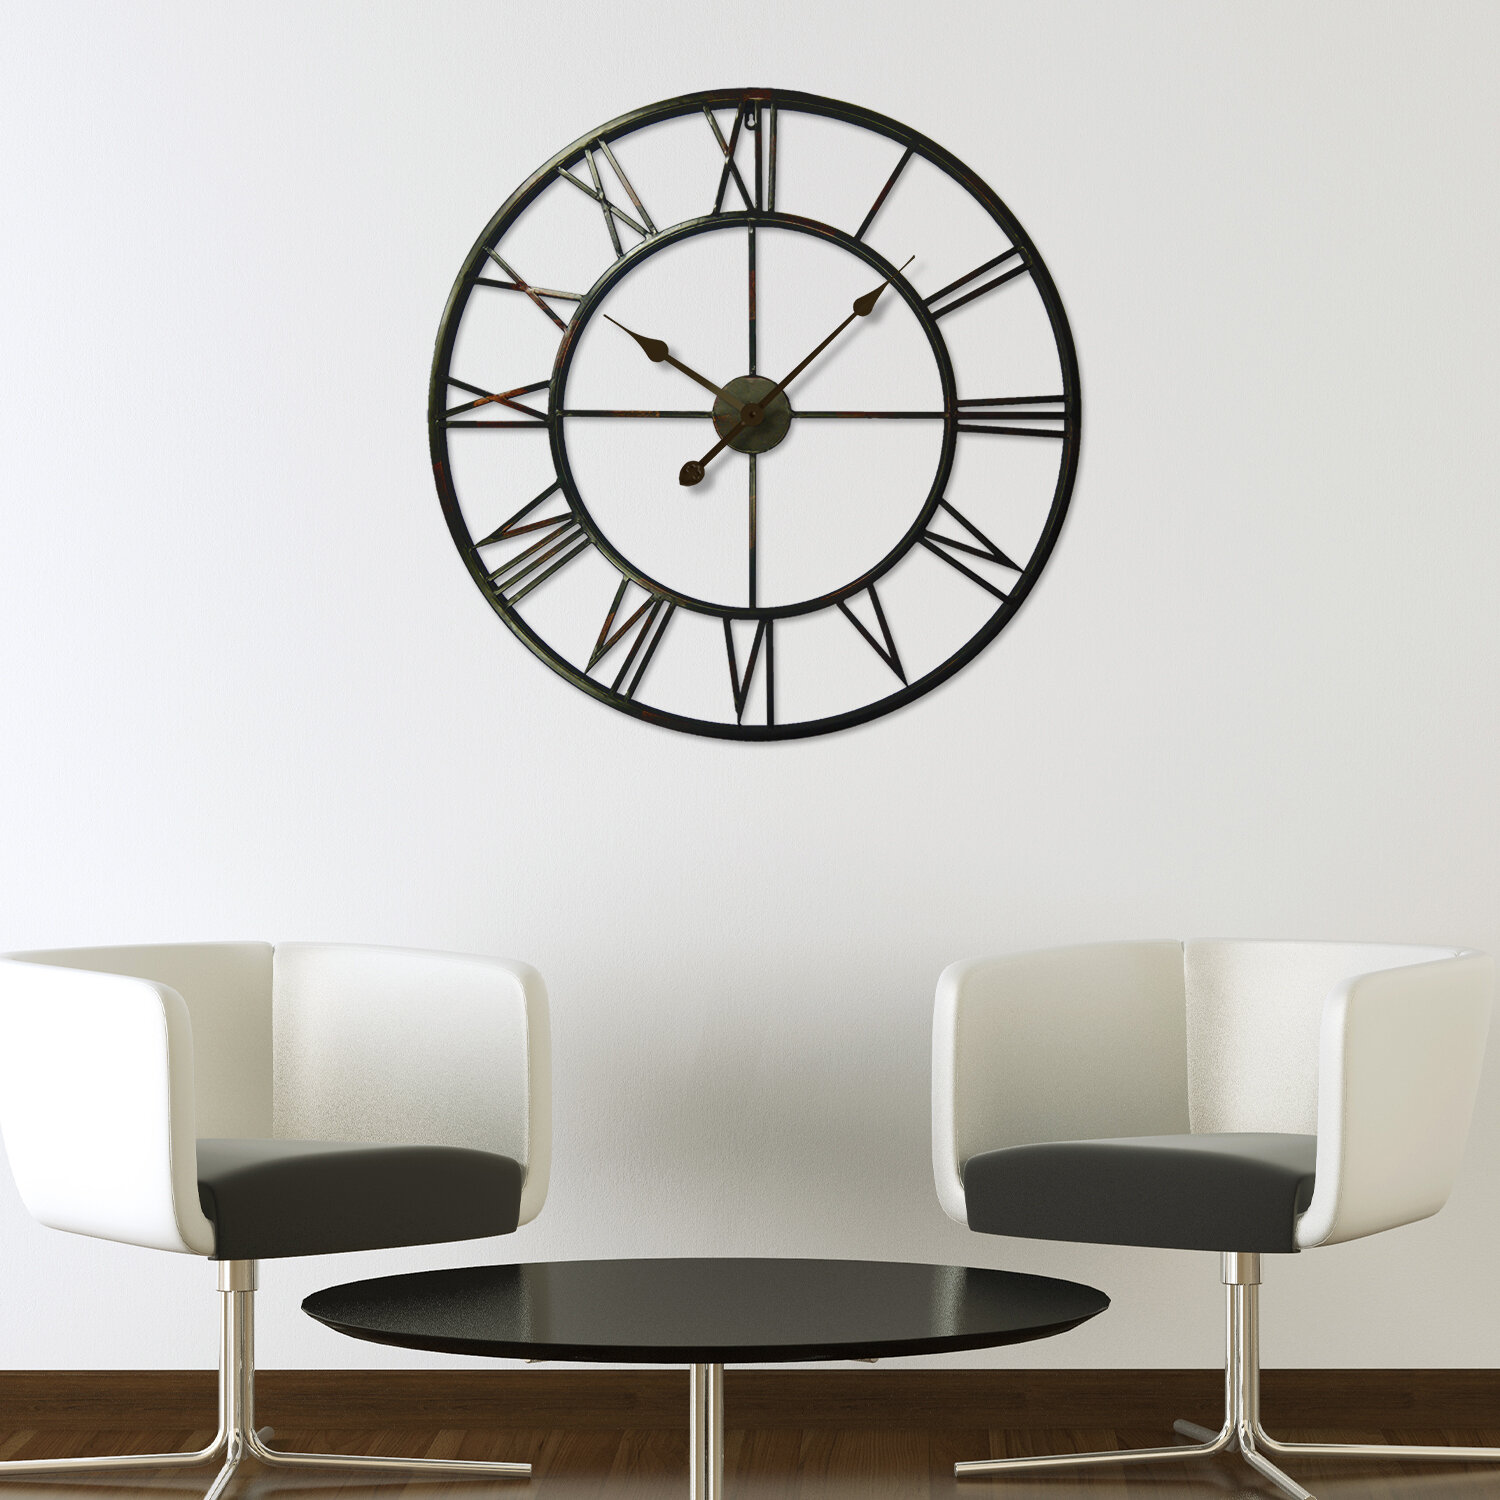 Modern Novelty Contemporary Wood Wall Clock in 4 Colors Home Decor Gift 